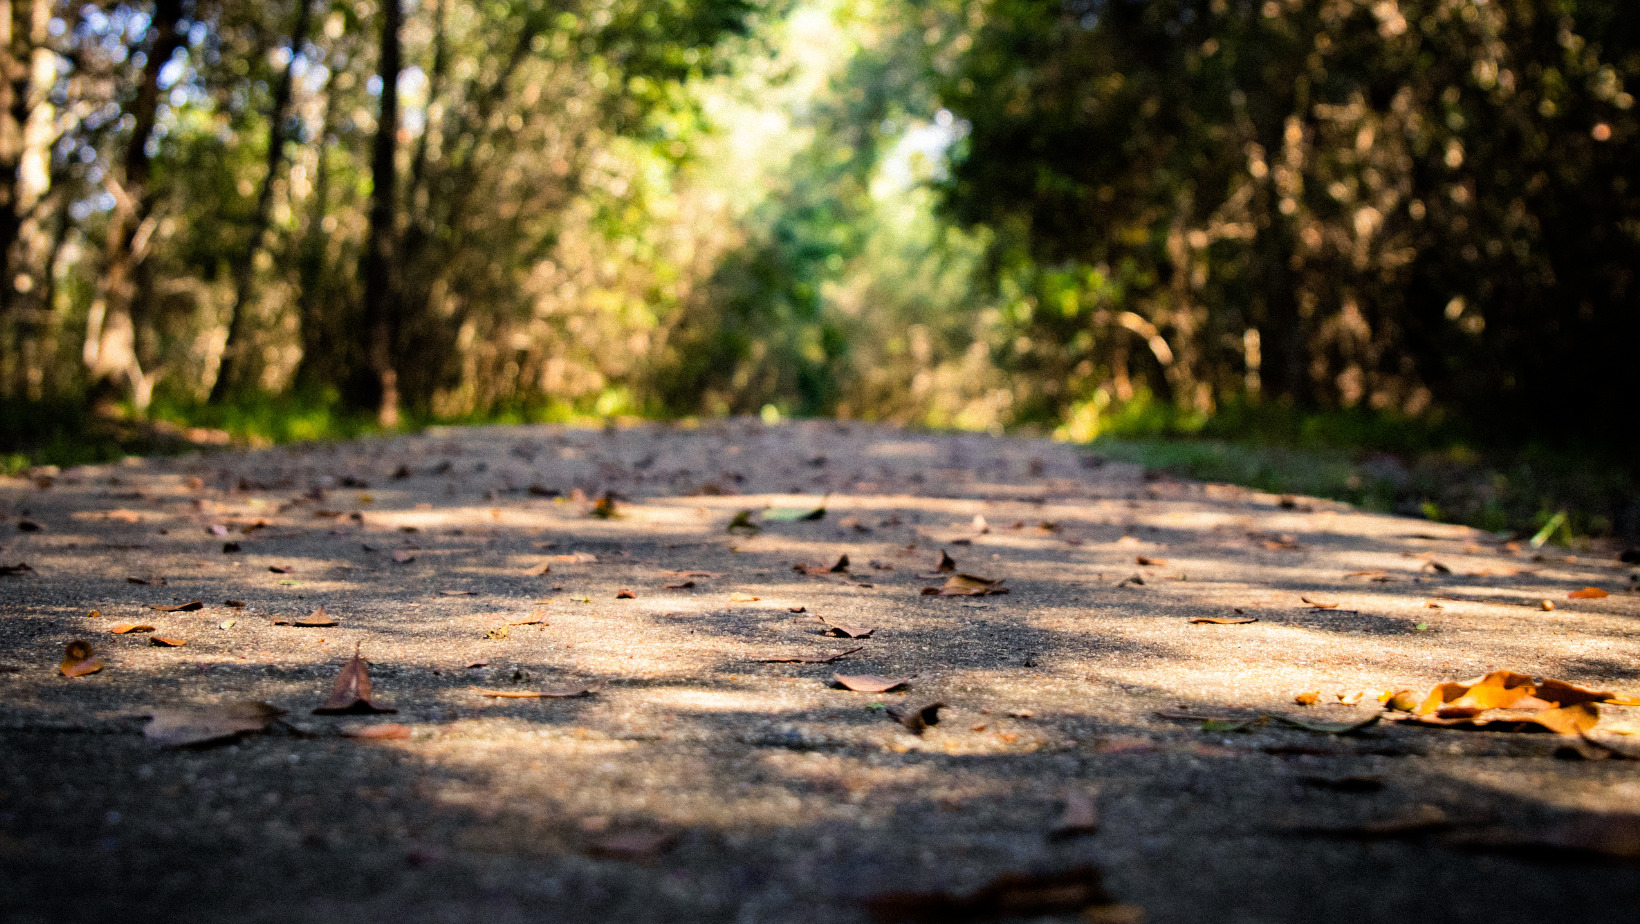 a paved path through a wooded area with fallen leaves on the trail.